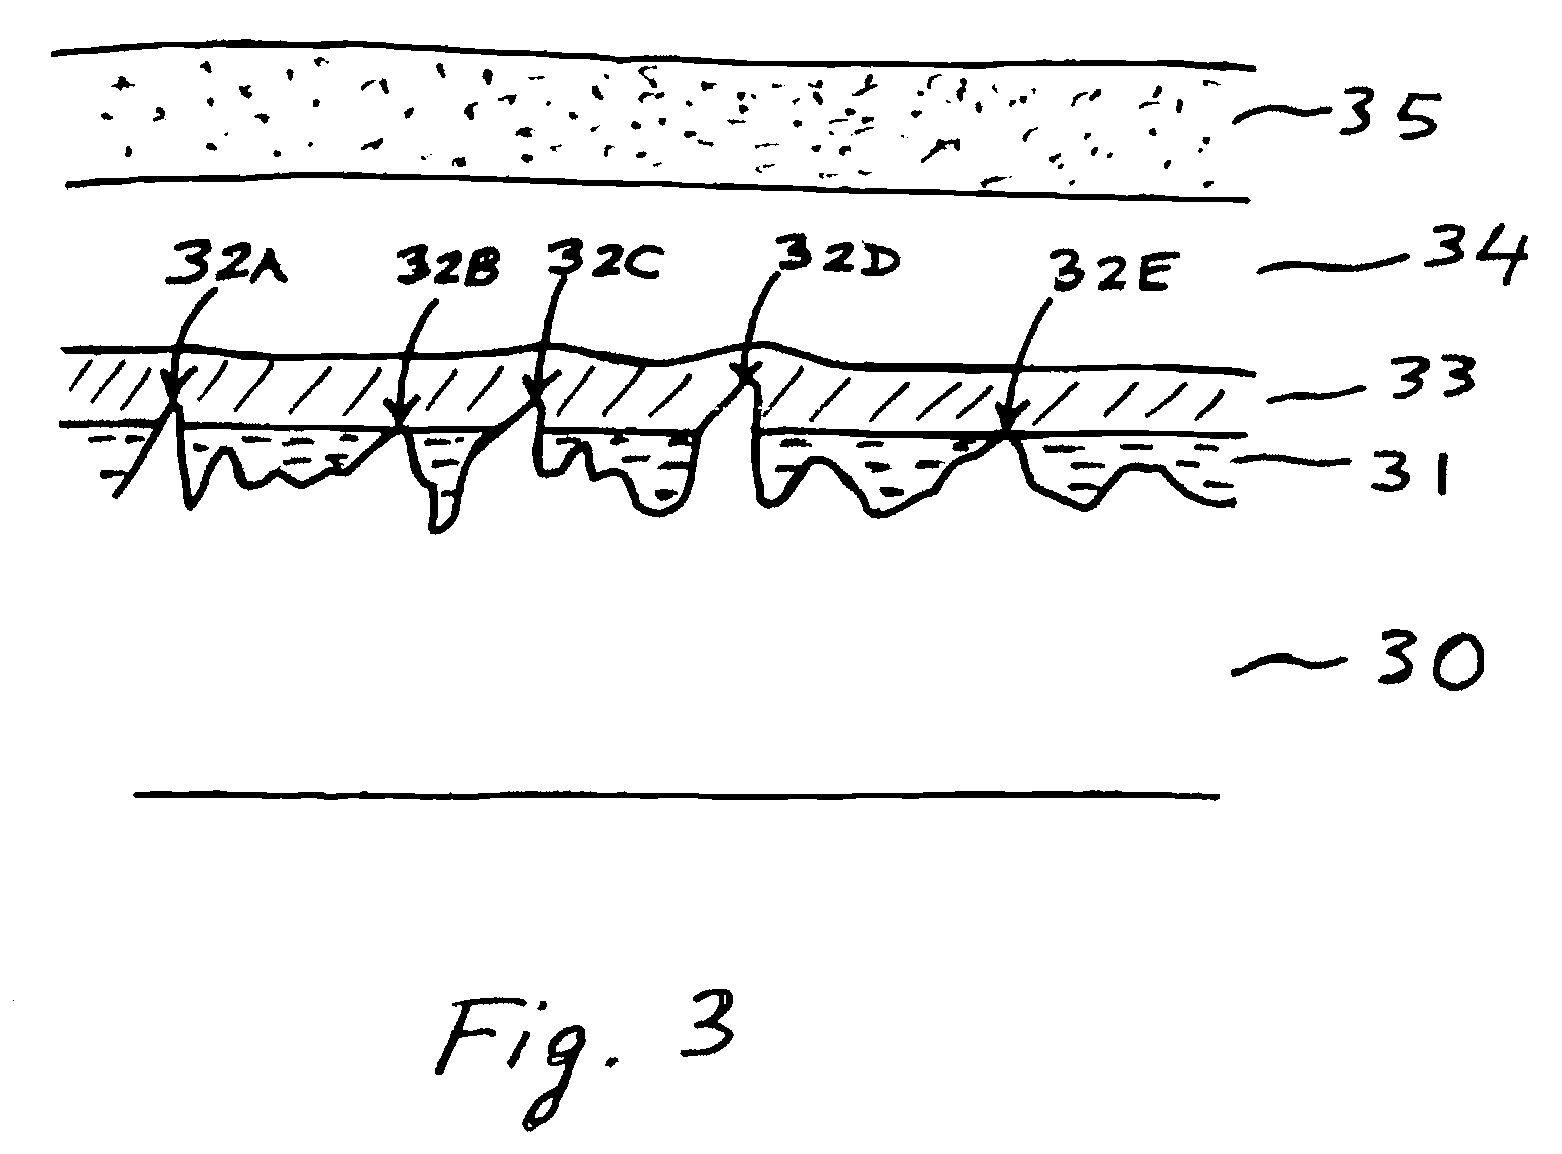 Substrate preparation for thin film solar cell manufacturing